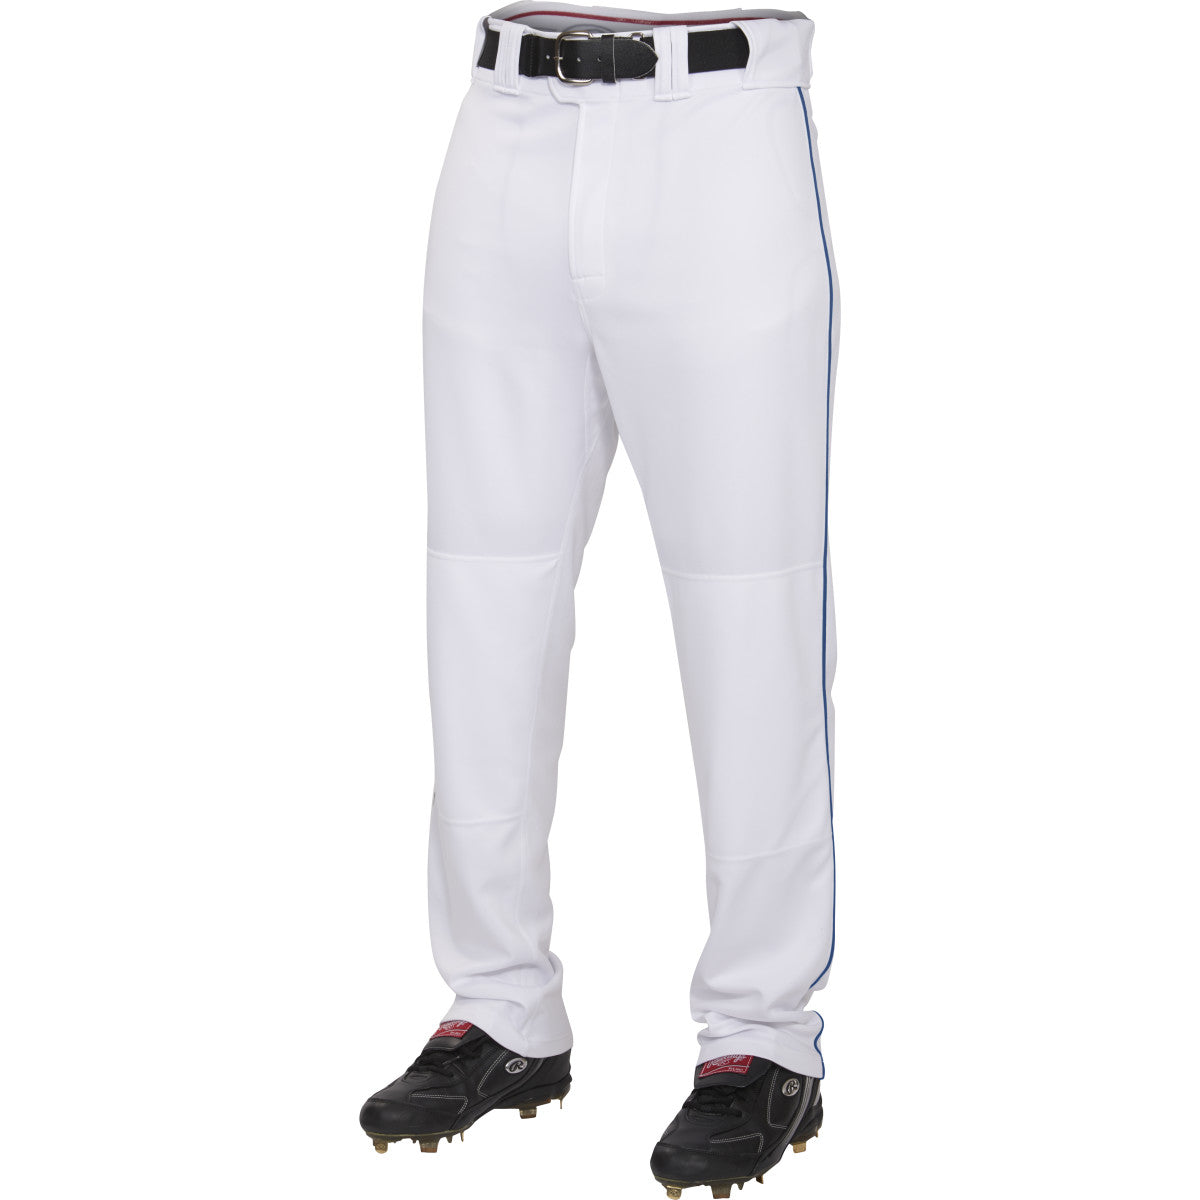 rawlings-youth-plated-piped-pants-ypro150p